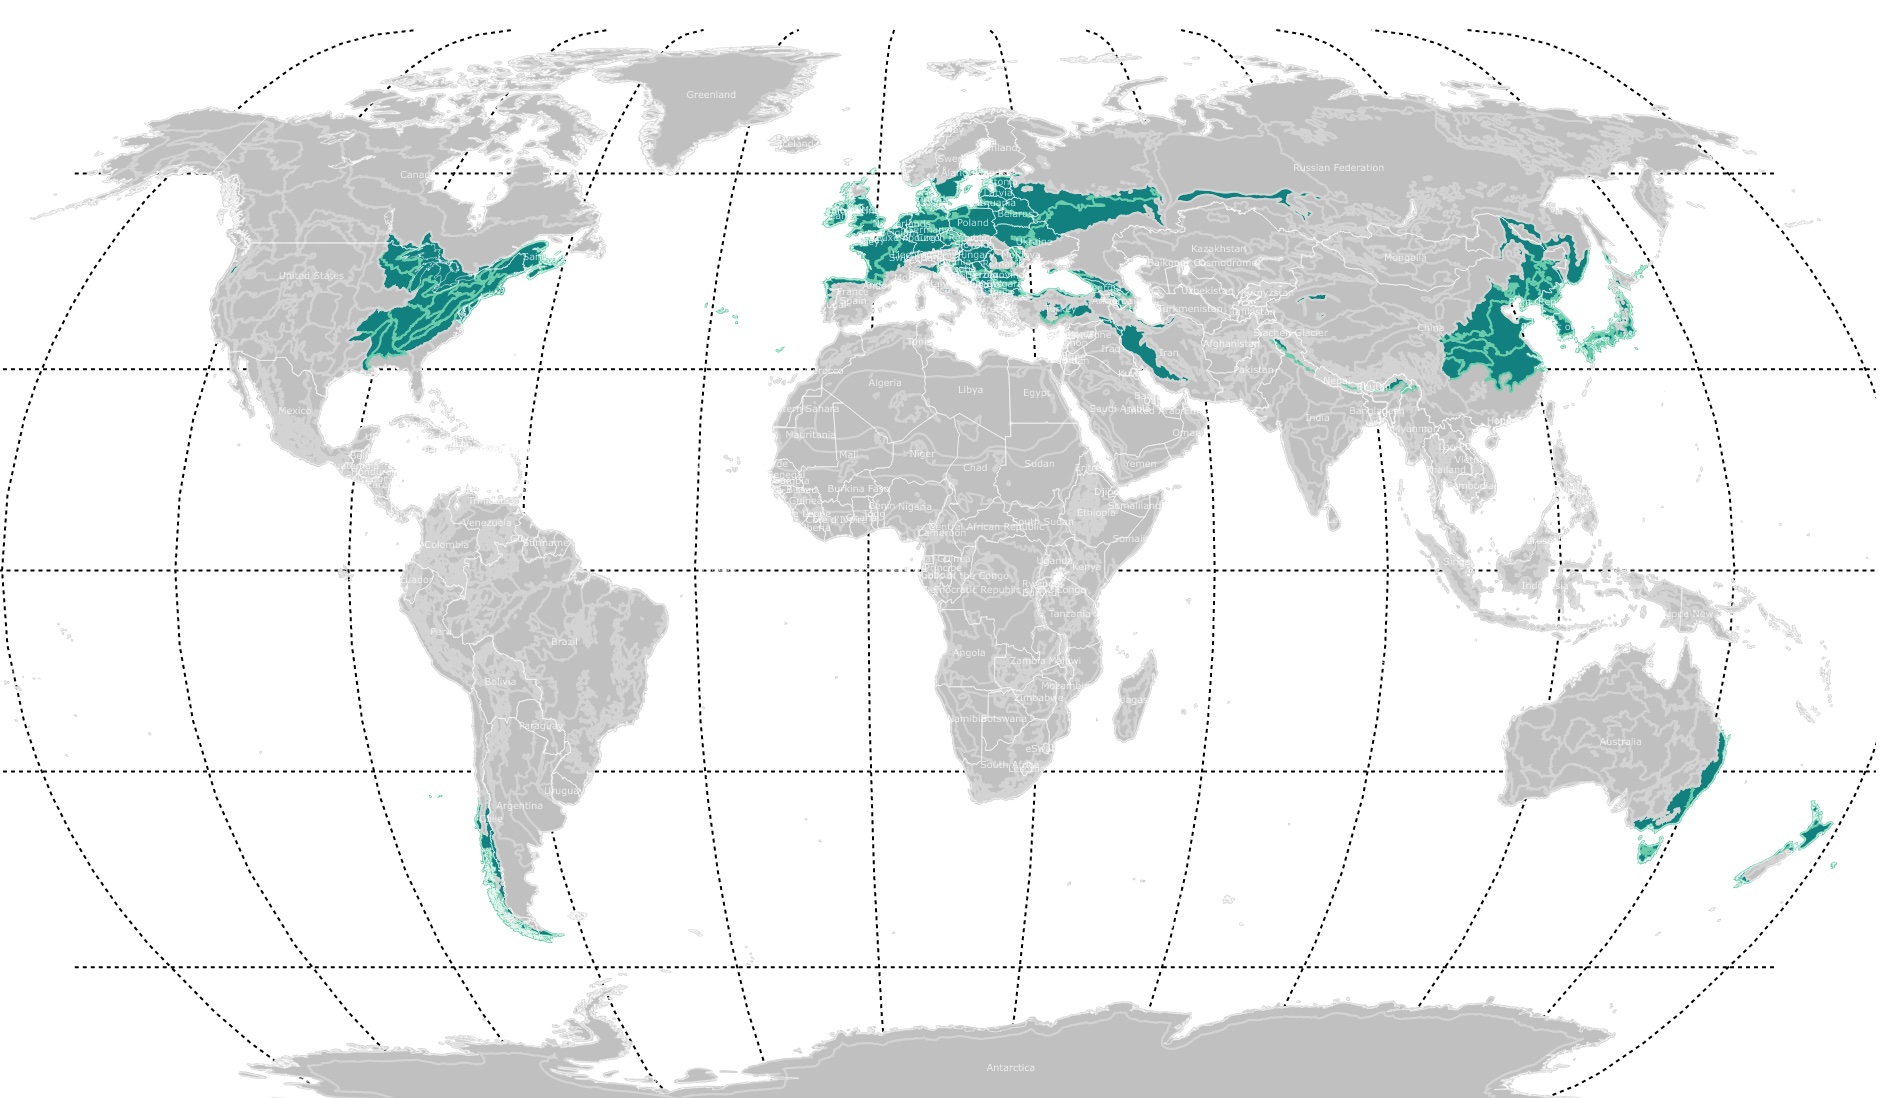 Map of Temperate Broadleaf mixed forests worldwide